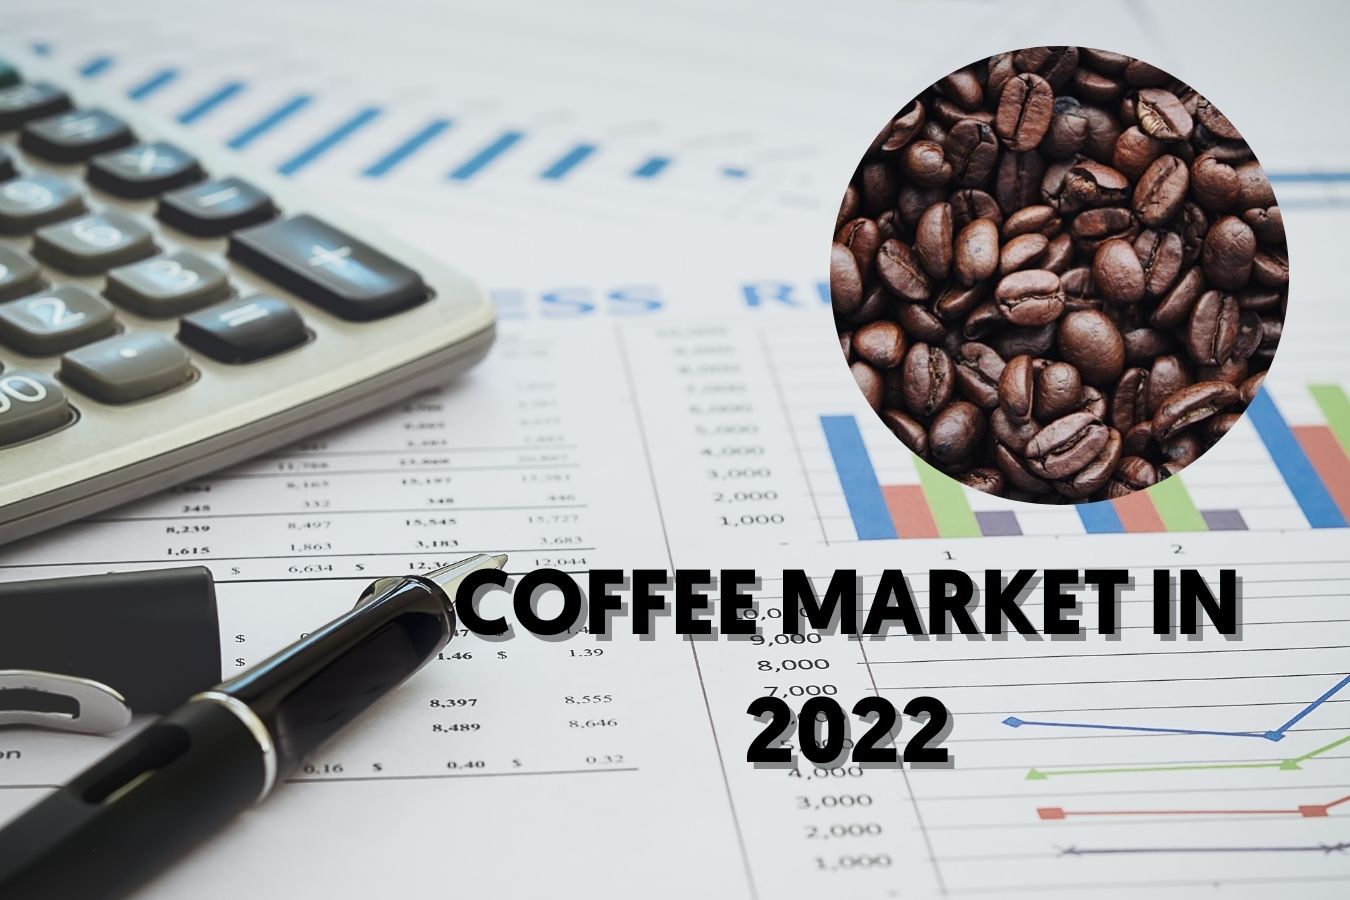 report-coffee-market-in-2022-the-world-may-have-a-deficit-of-3-million-bags-of-coffee